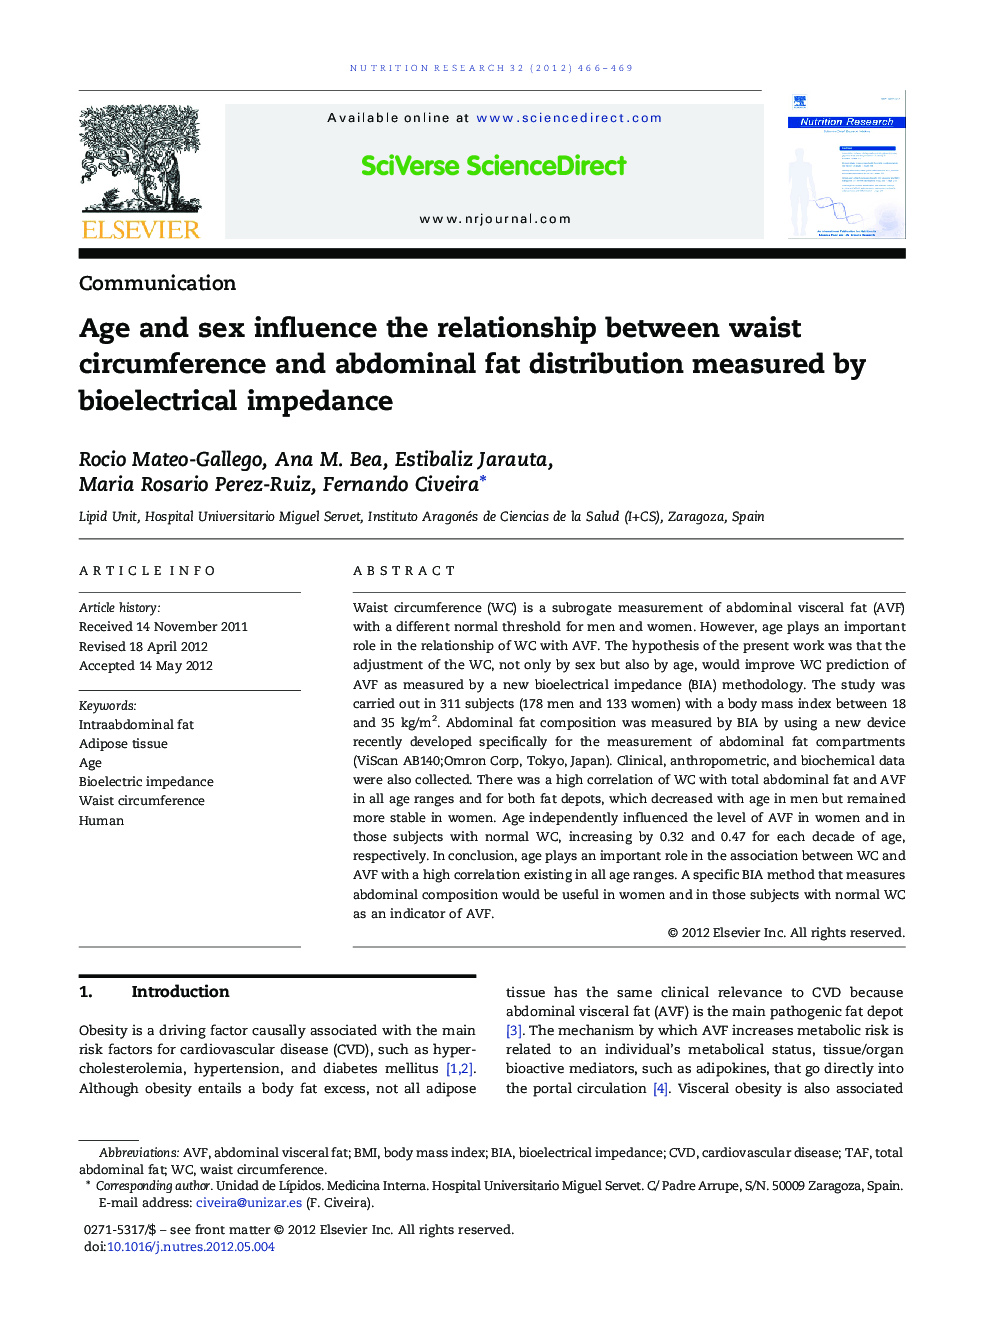 Age and sex influence the relationship between waist circumference and abdominal fat distribution measured by bioelectrical impedance